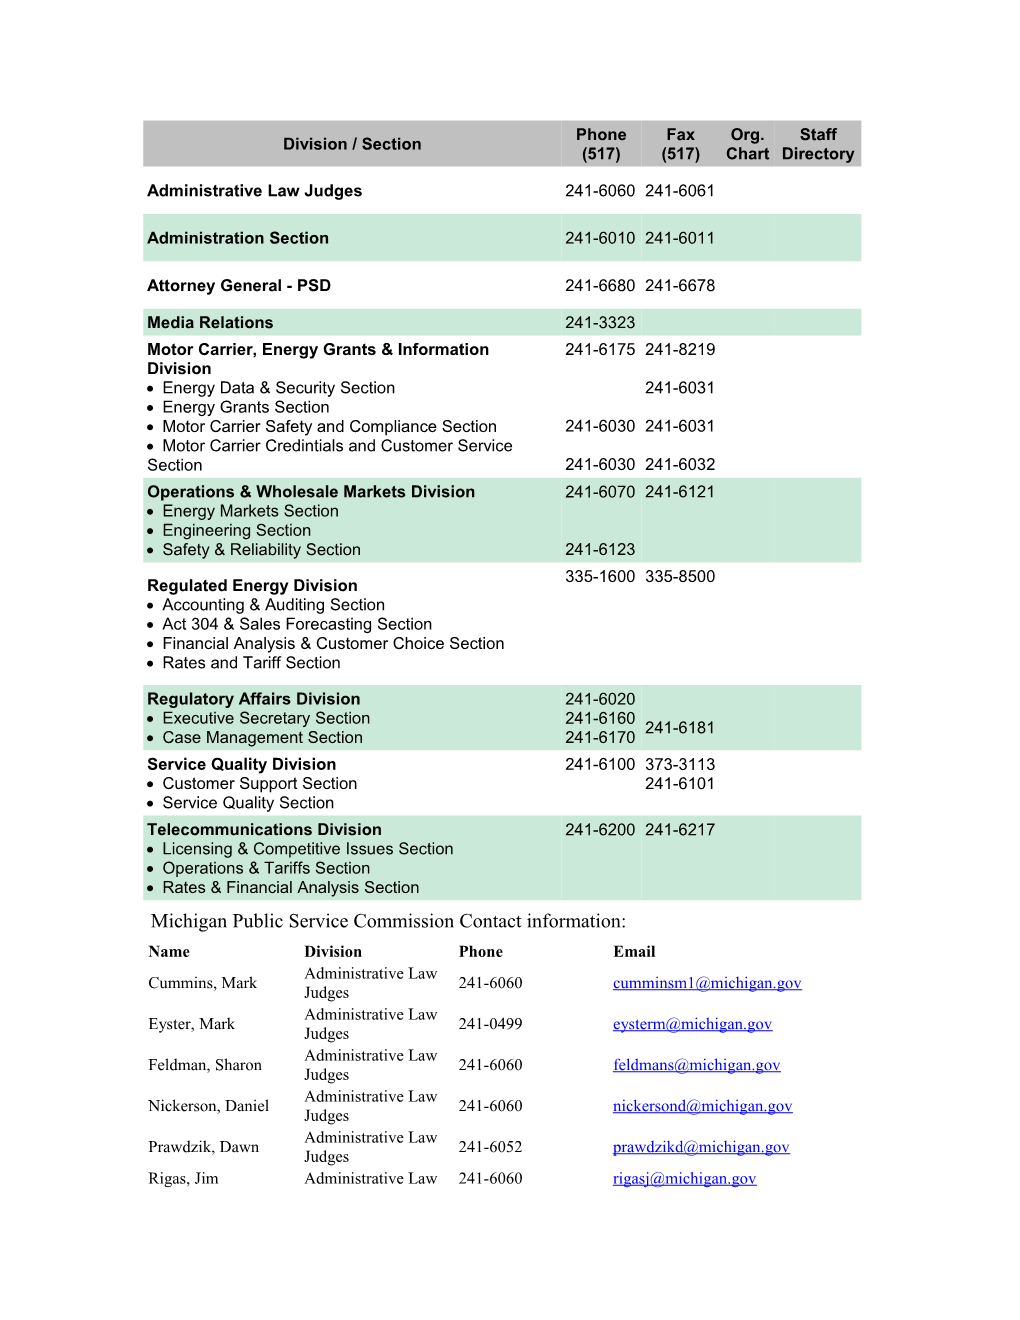 Michigan Public Service Commission Contact Information